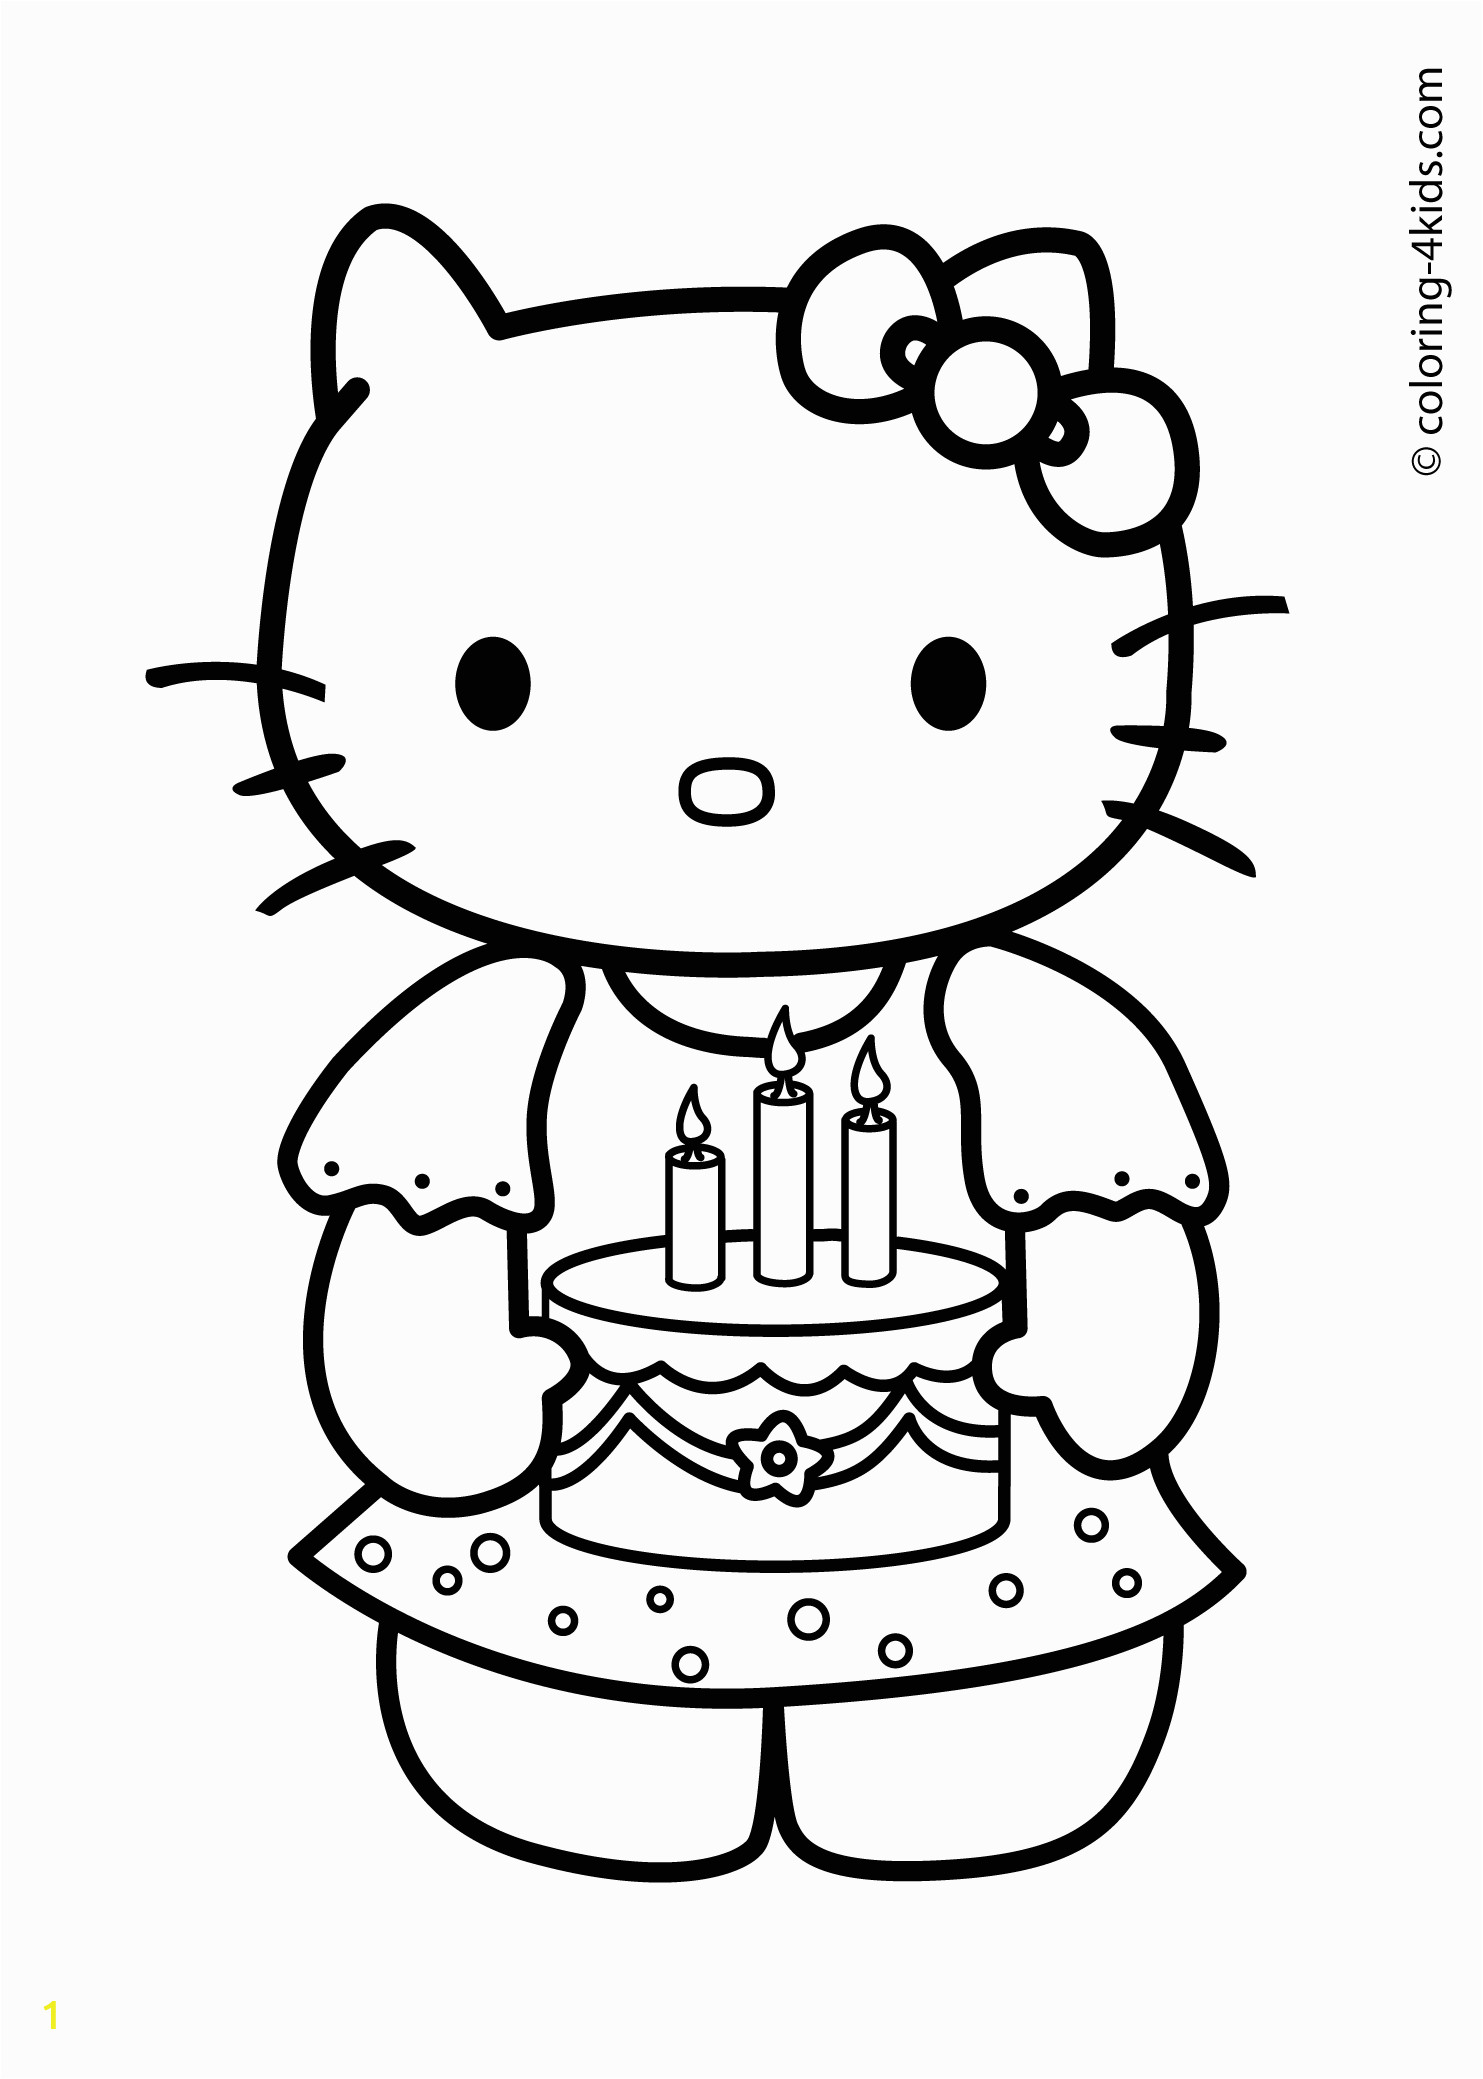 Hello Kitty Coloring Pages Dress Free Hello Kitty Coloring Pages Happy Birthday Download